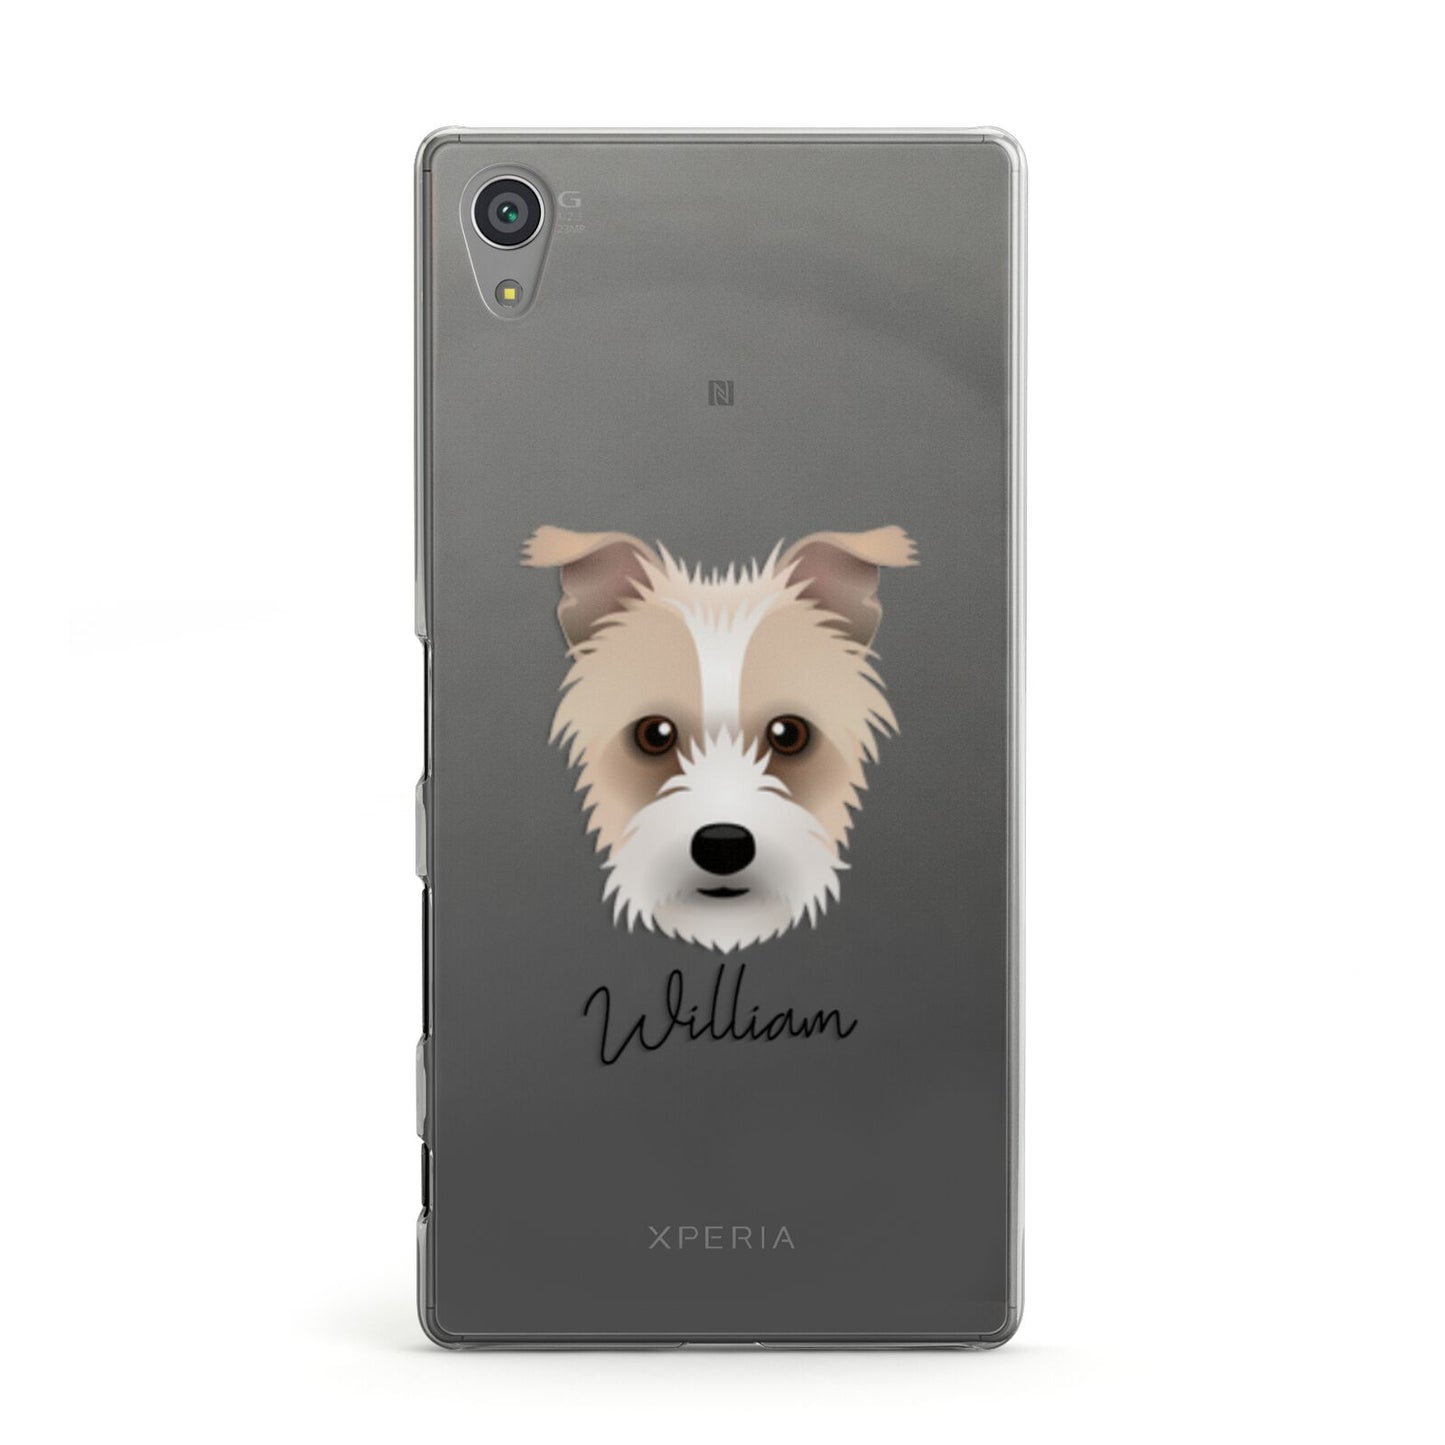 Sporting Lucas Terrier Personalised Sony Xperia Case